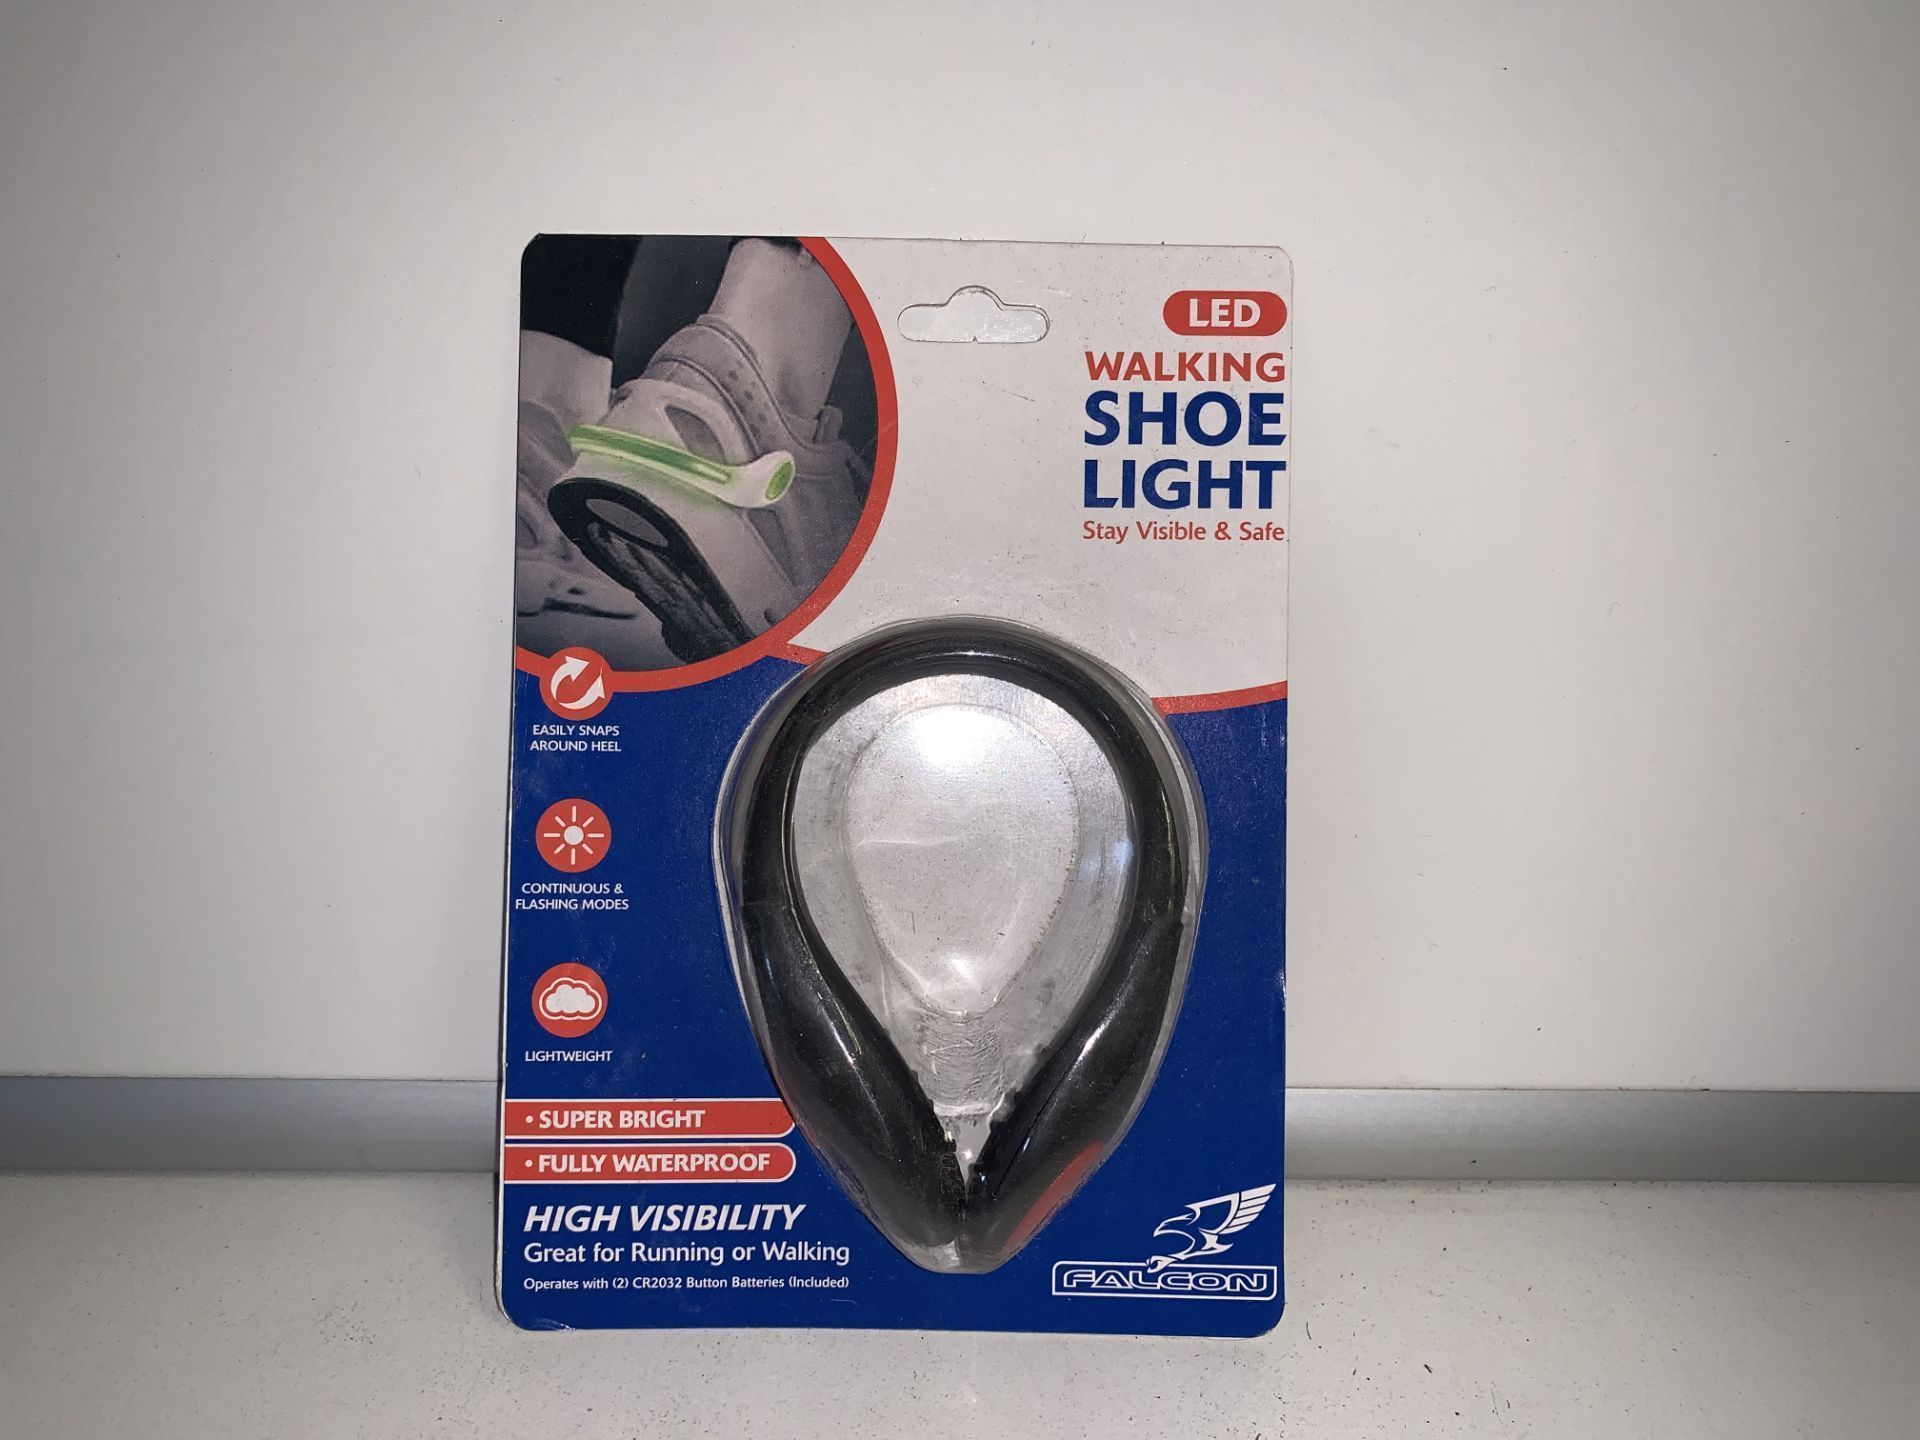 60 X NEW PACKAGED FALCON LED WALKING SHOE LIGHTS. STAY VISABLE & SAFE. RRP £9.99 EACH (ROW11)